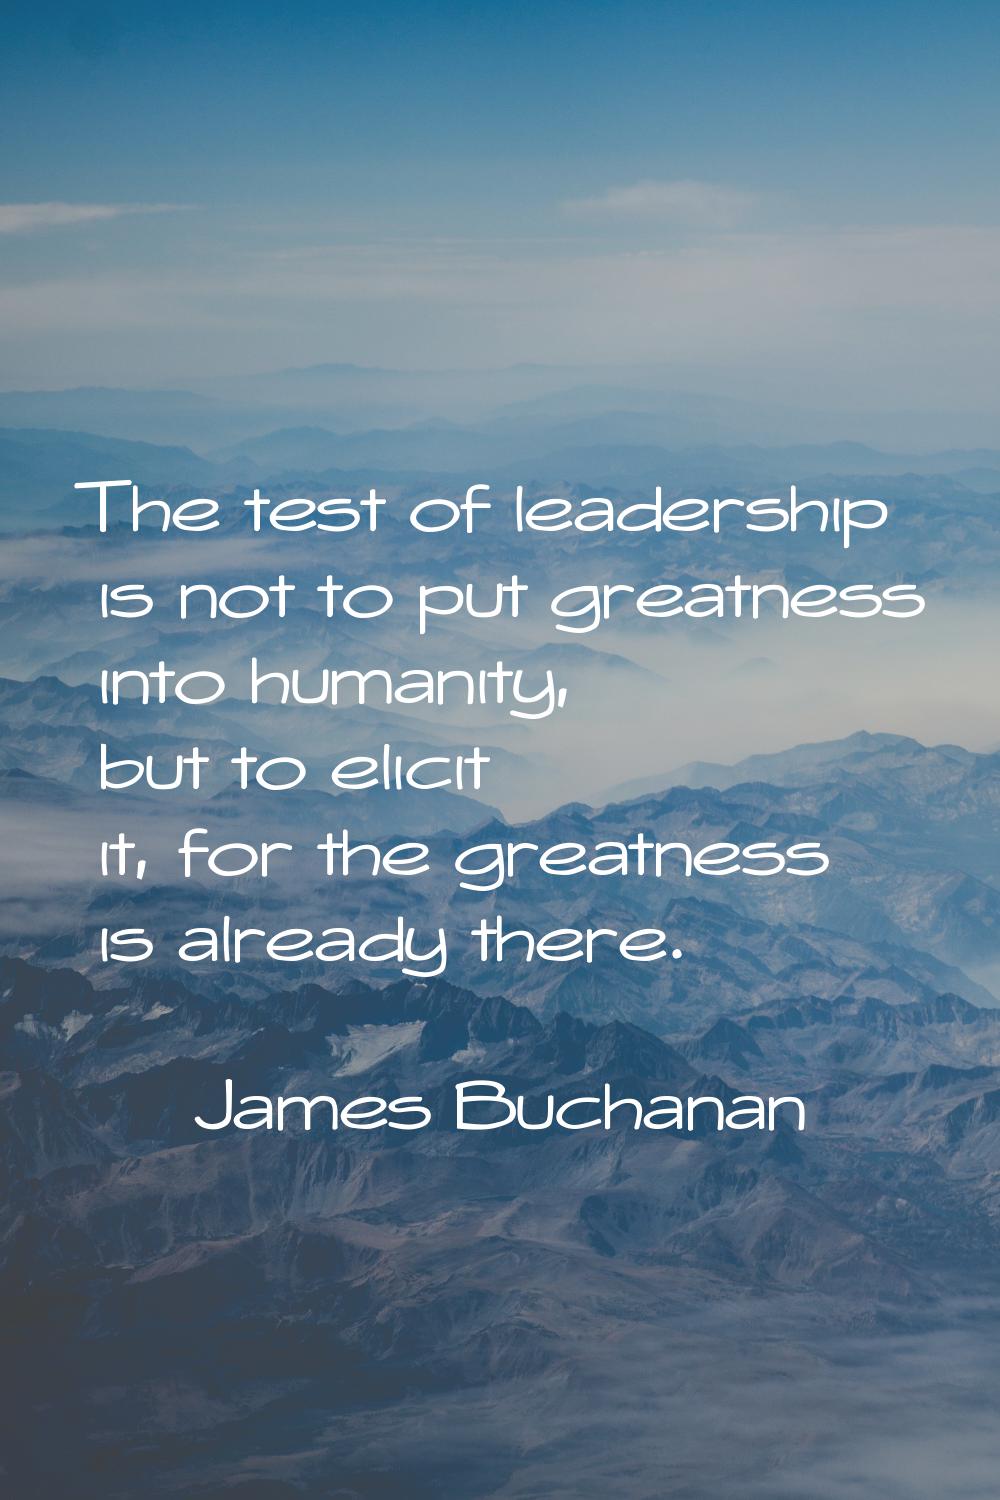 The test of leadership is not to put greatness into humanity, but to elicit it, for the greatness i